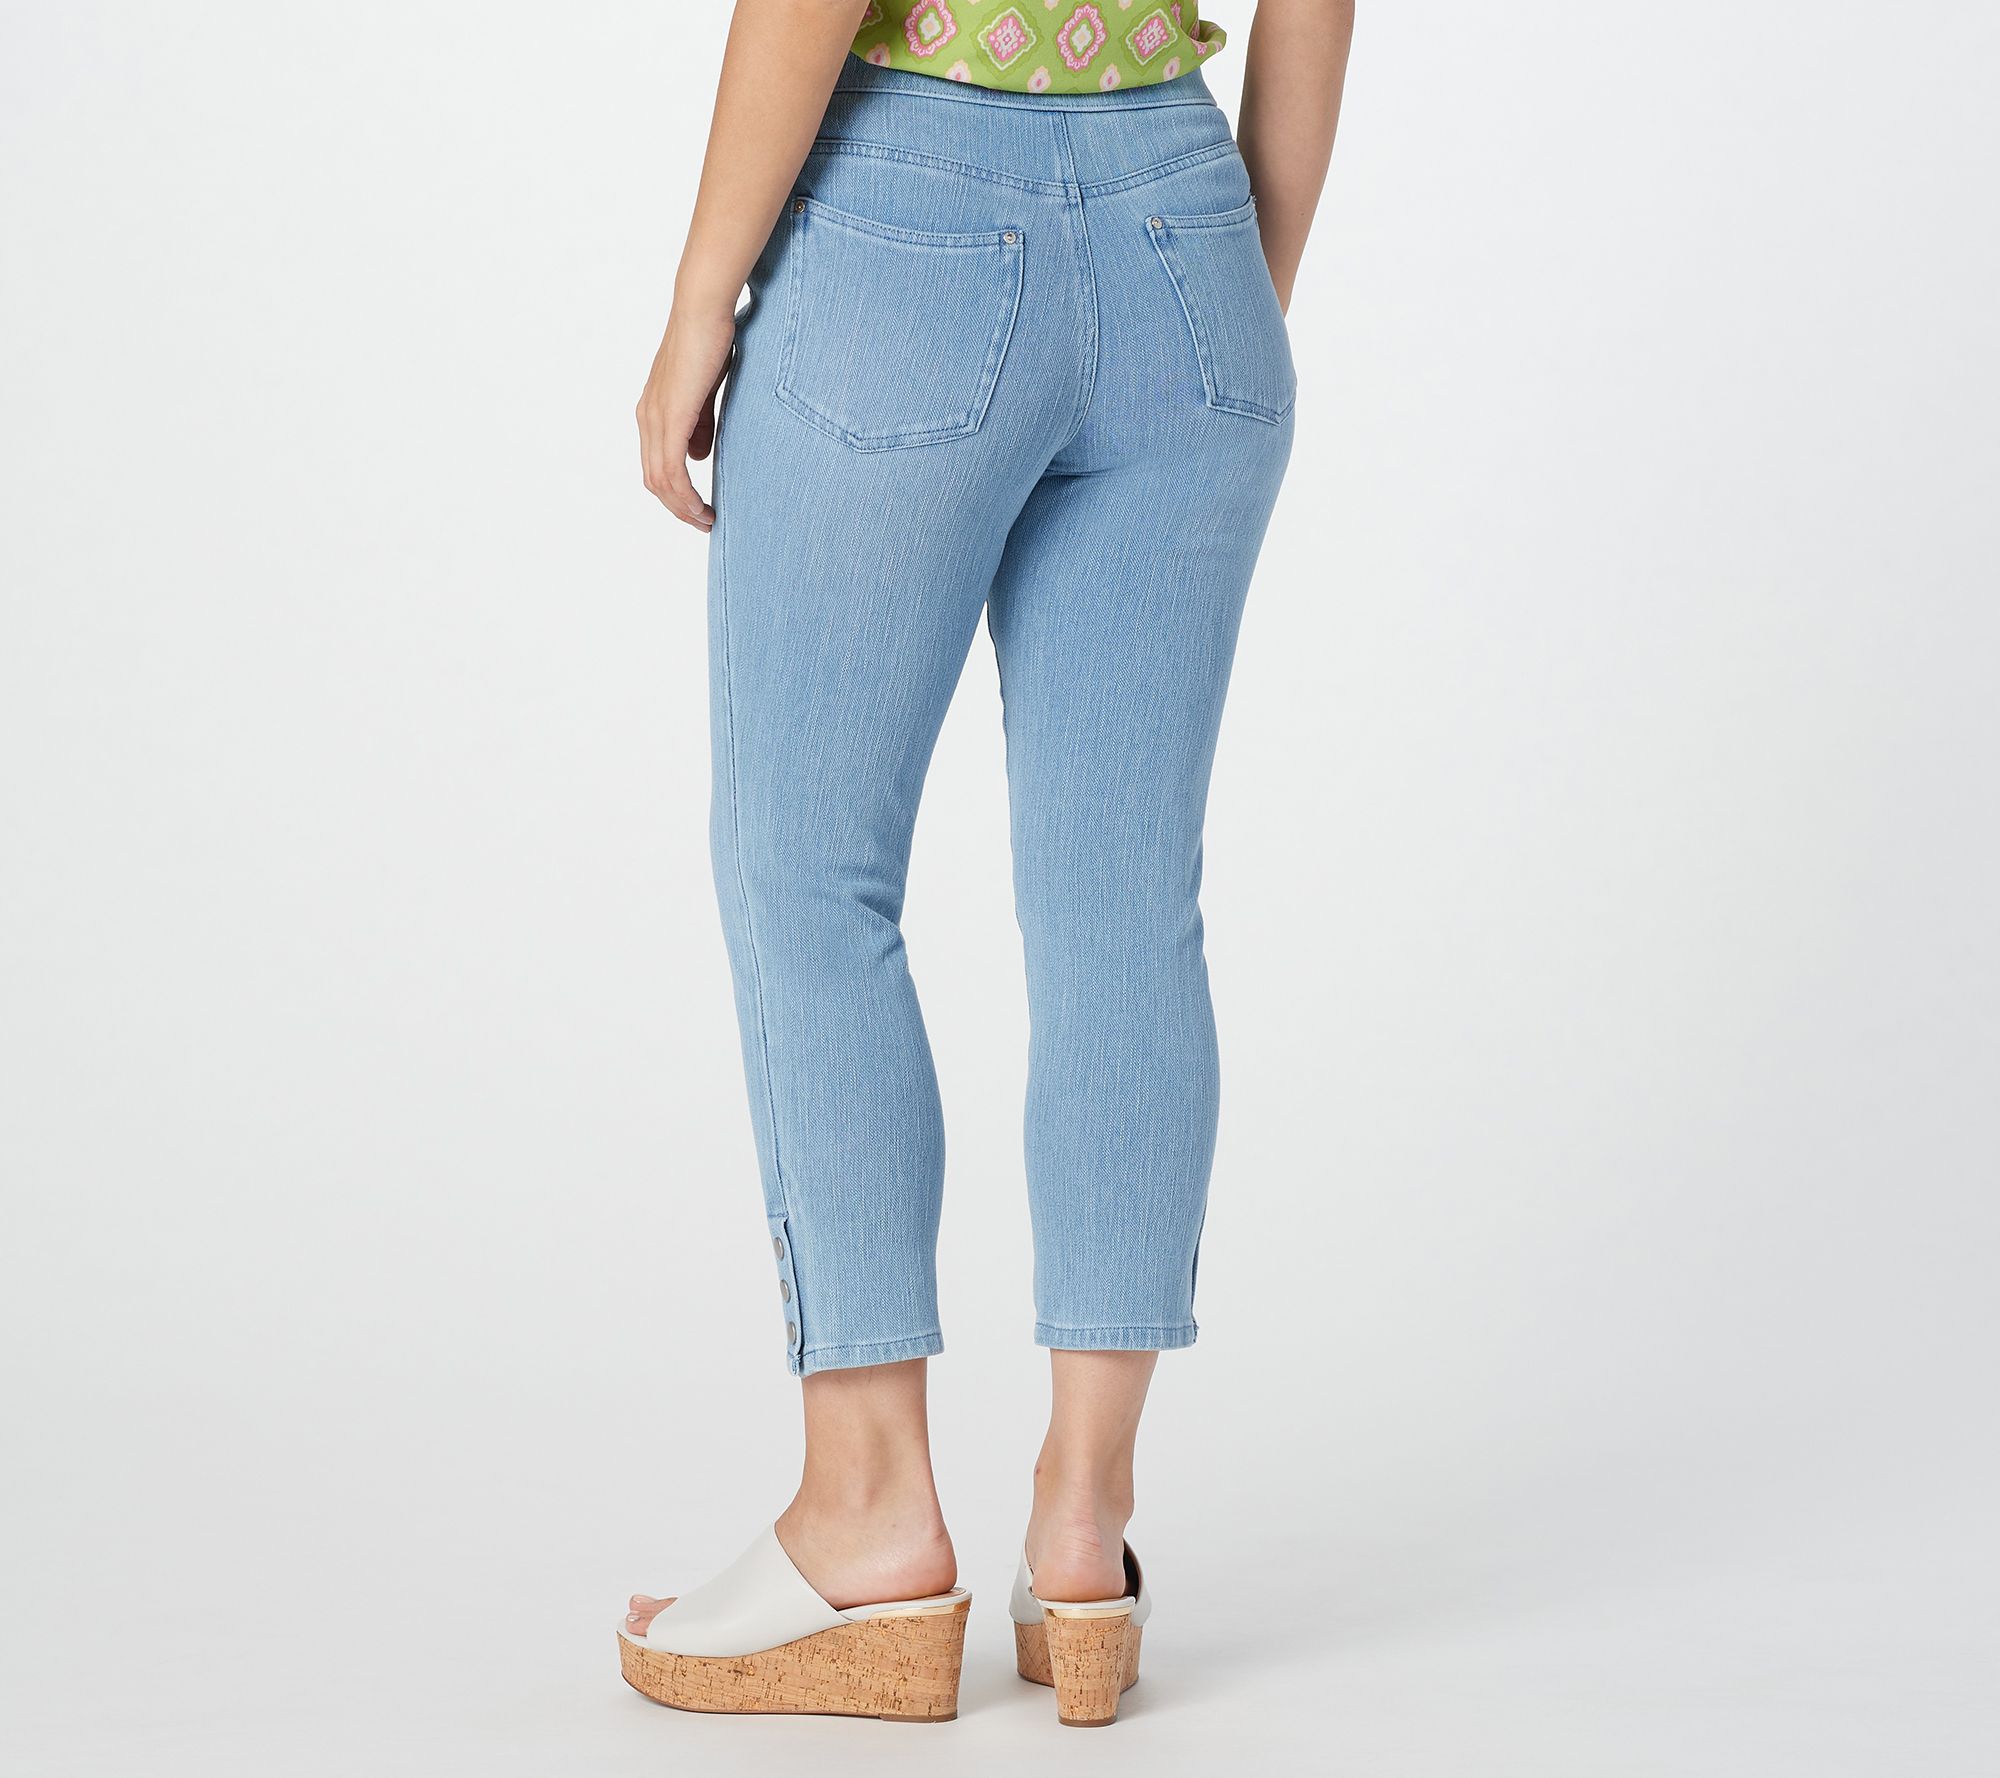 Belle by Kim Gravel Flexibelle Cropped Jeans with Snaps - QVC.com